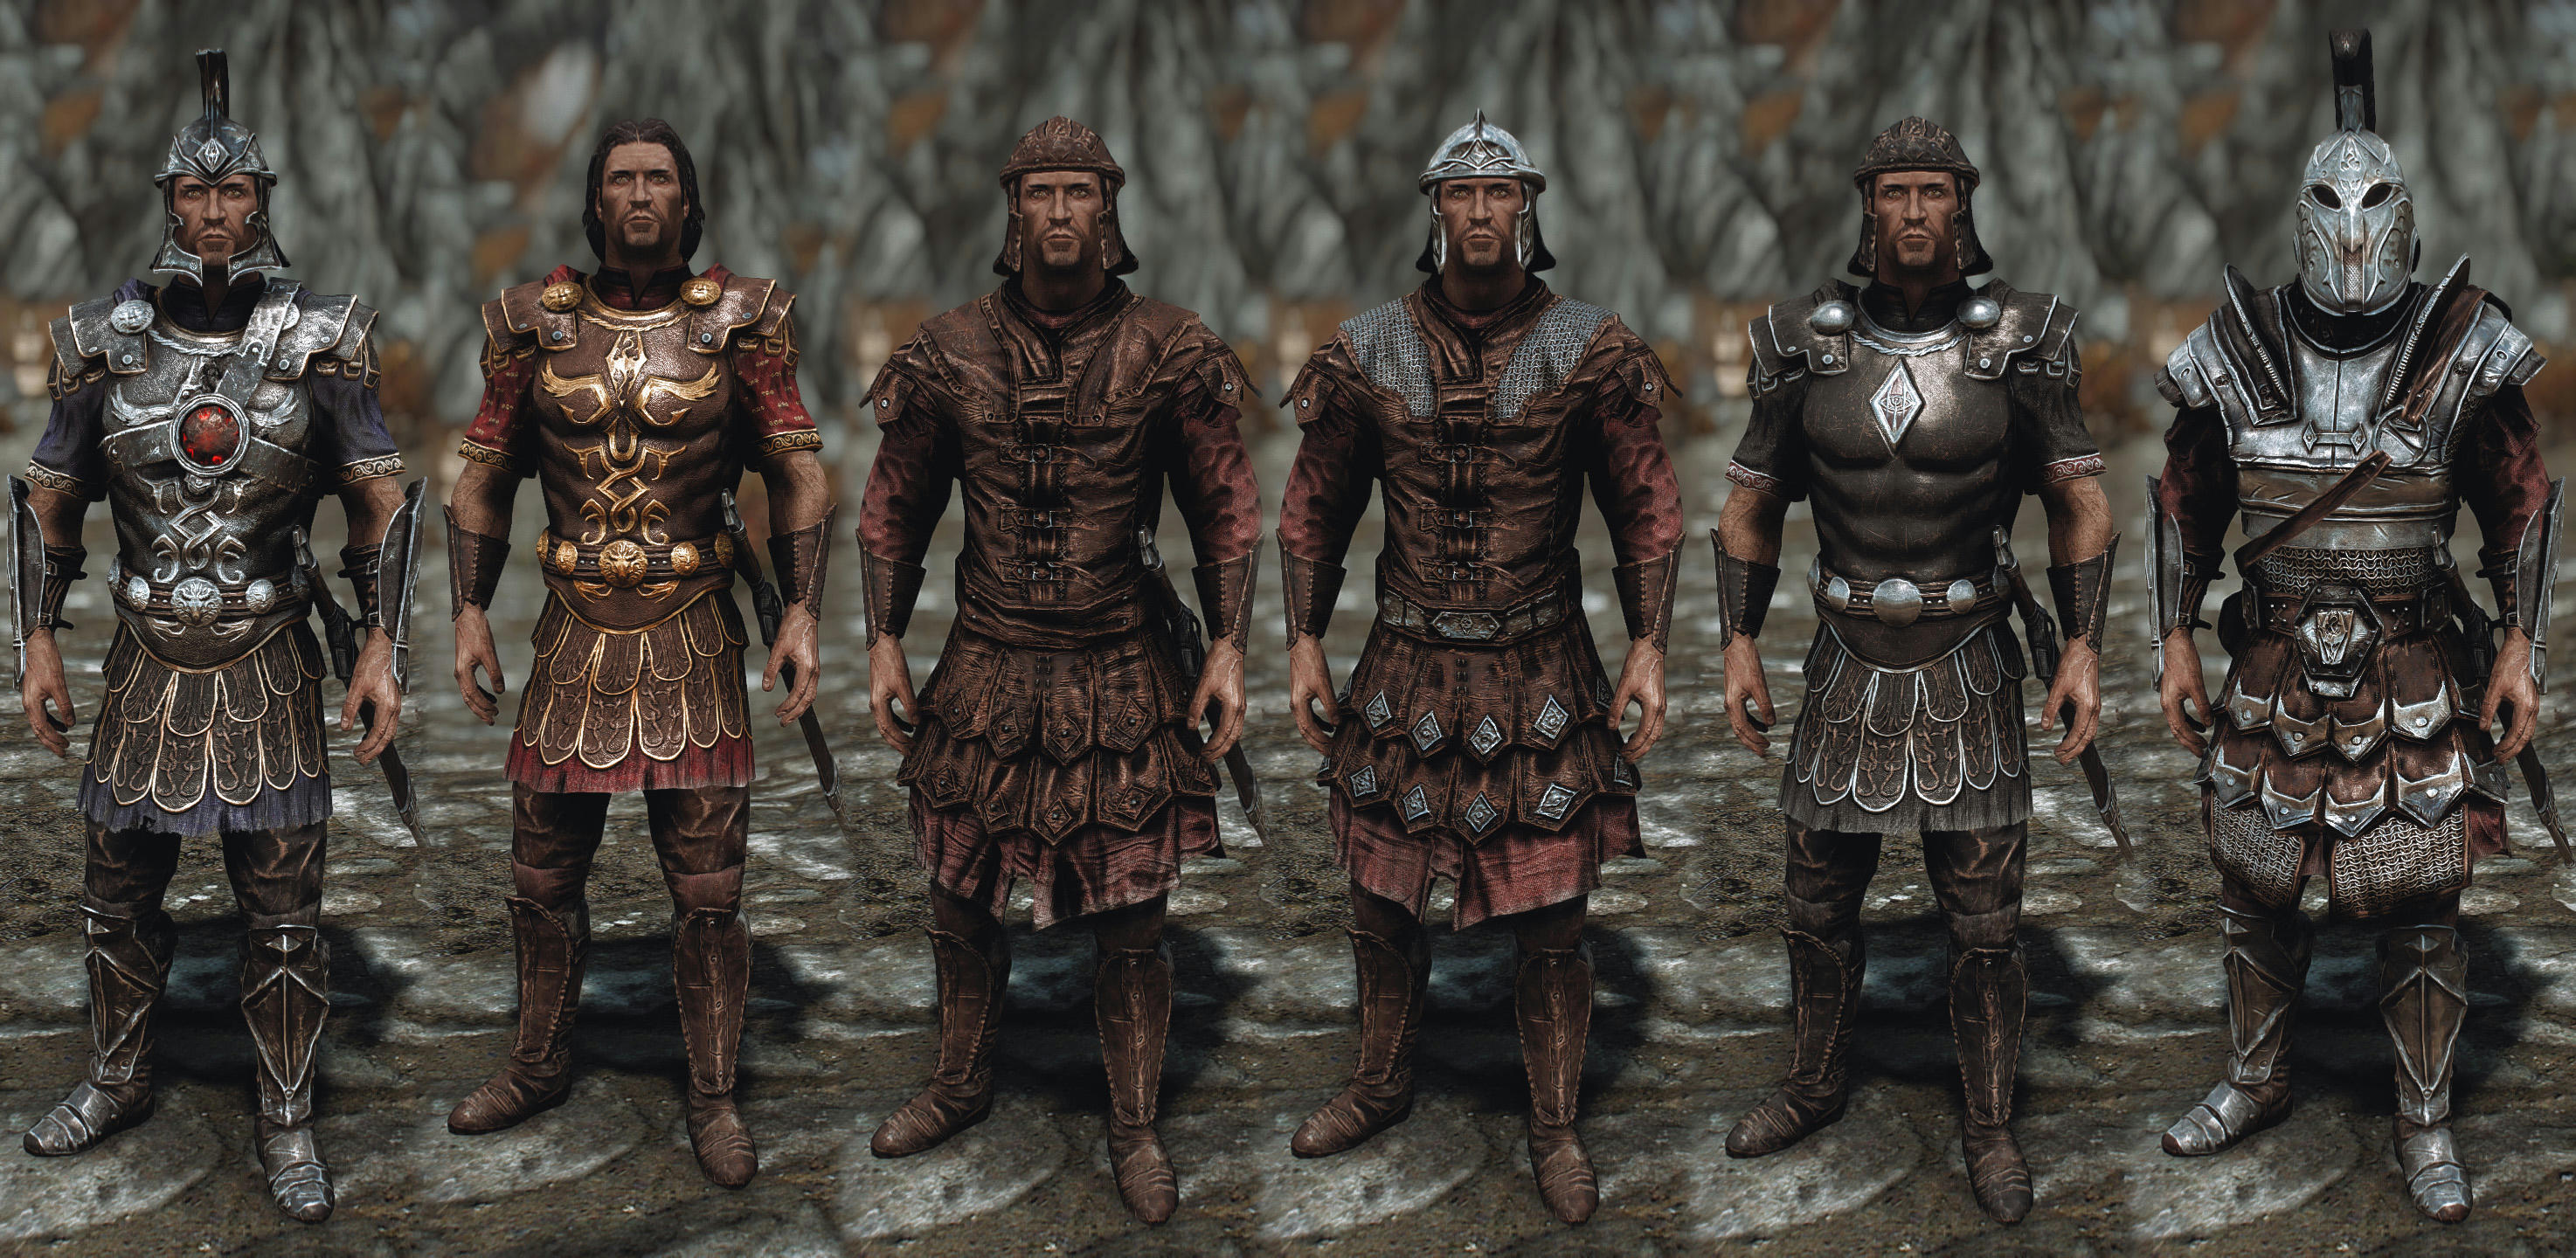 Frankly HD Imperial Armor and Weapons at Skyrim Nexus - Mods and Community